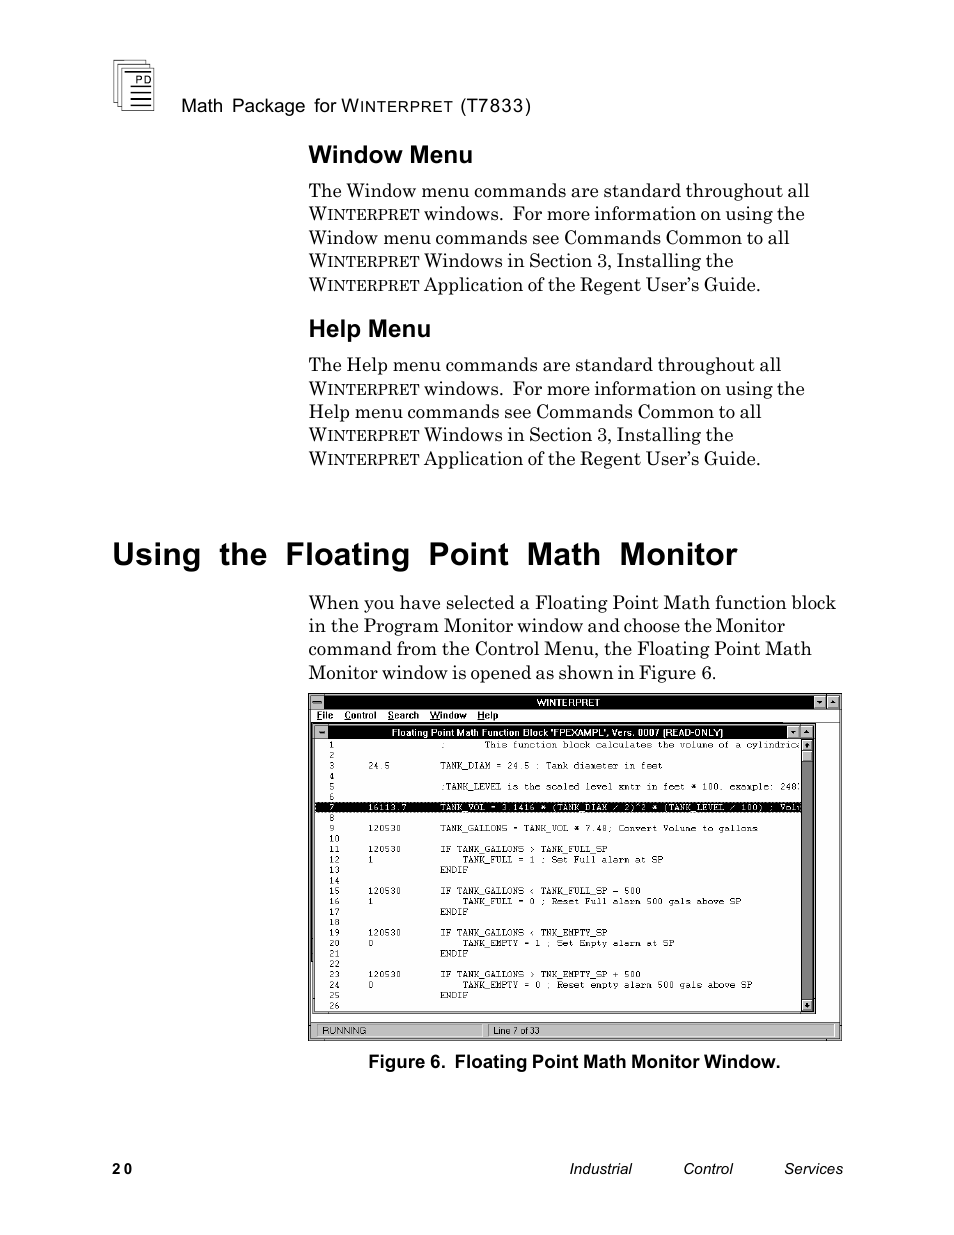 Using the floating point math monitor, Window menu, Help menu | Rockwell Automation T7833 ICS Regent+Plus Math Package for Winternet User Manual | Page 20 / 26